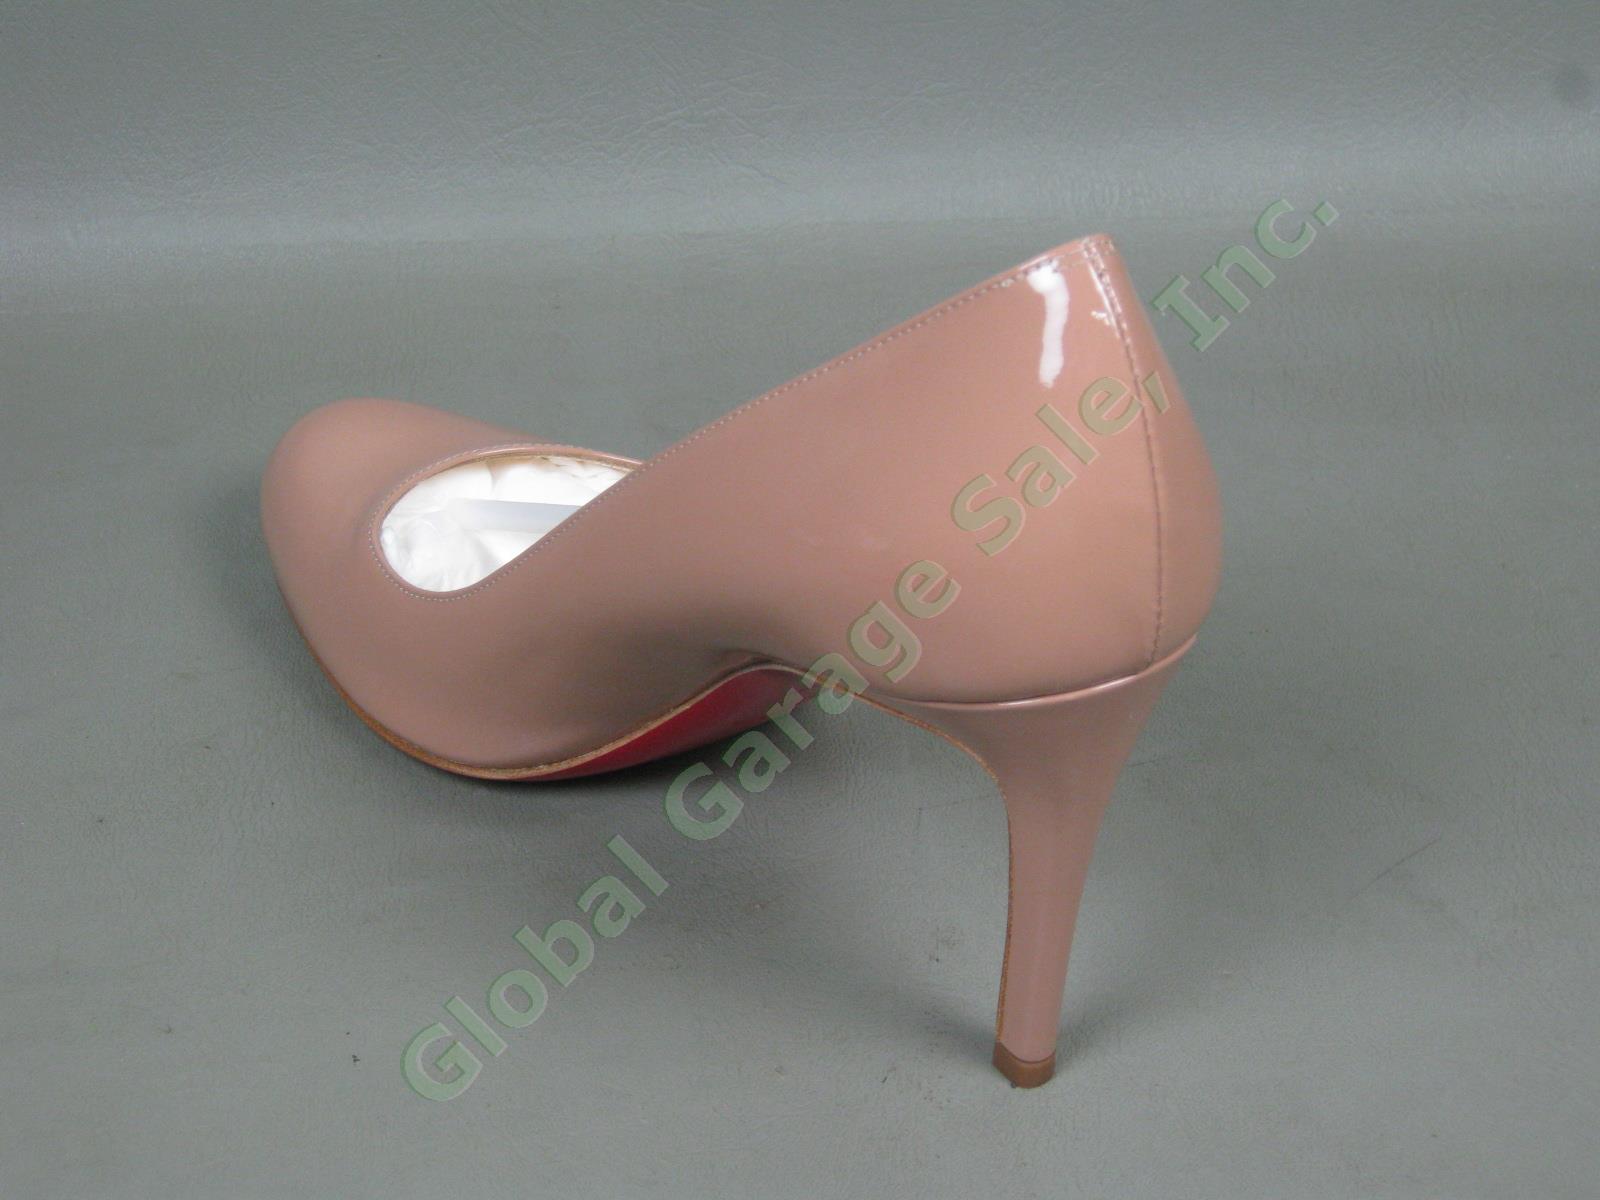 NEW Christian Louboutin Nude Simple Patent Calf Leather Pump 90mm Heel 37.5/7.5 4